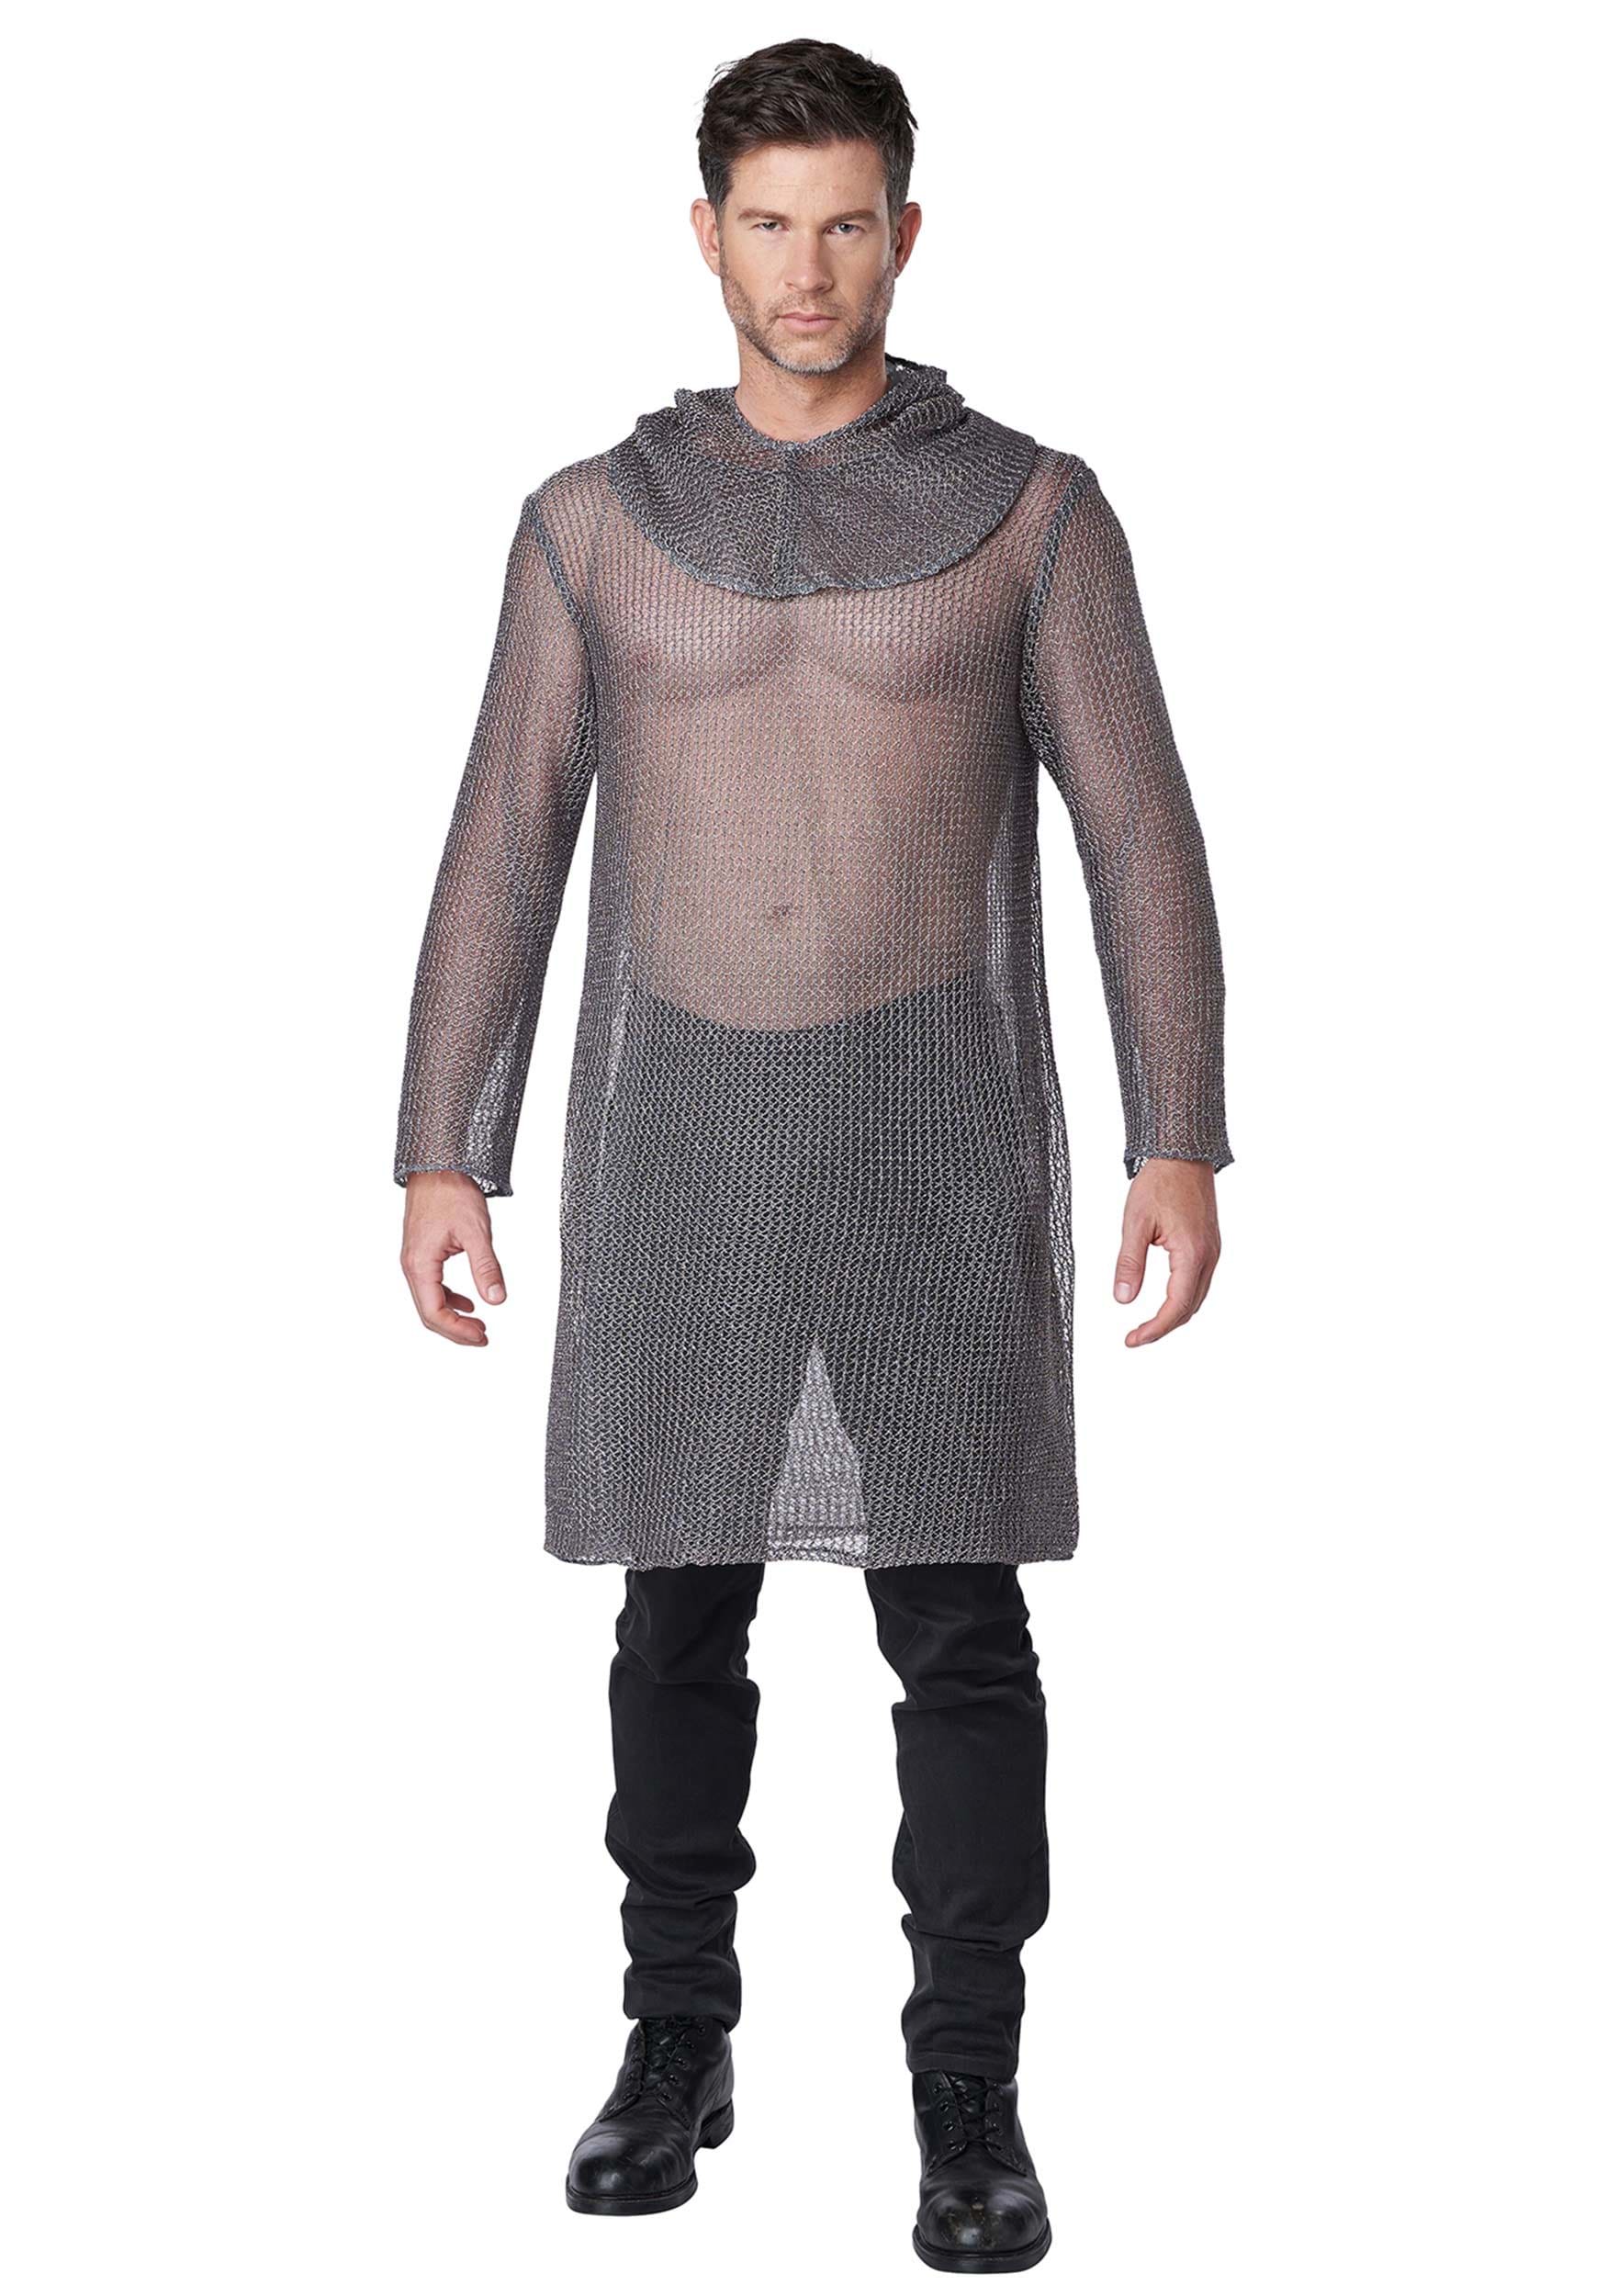  Amscan Chainmail Tunic and Cowl, Adult Size